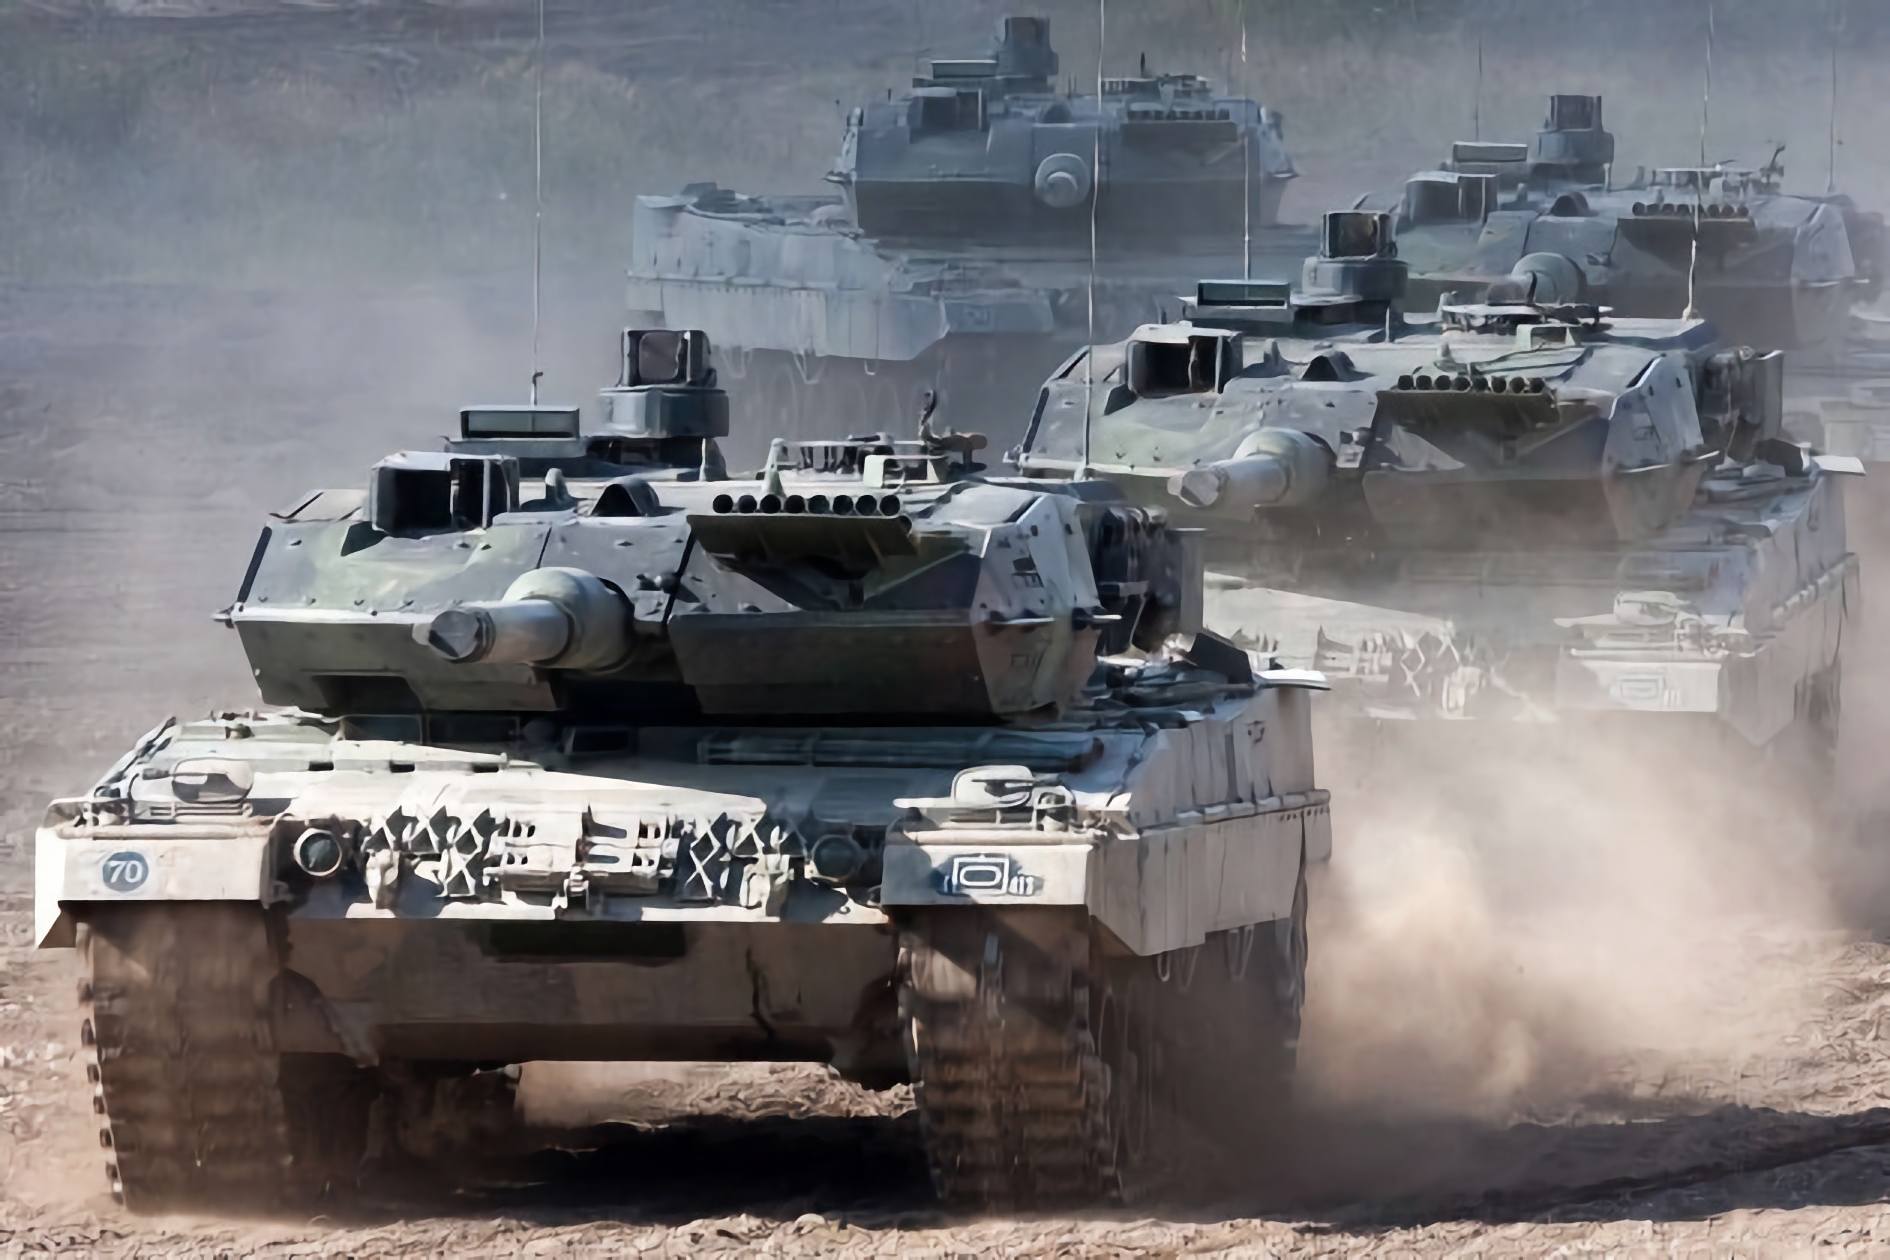 Rheinmetall may transfer 139 Leopard 1 and Leopard 2 tanks to the Ukrainian Armed Forces